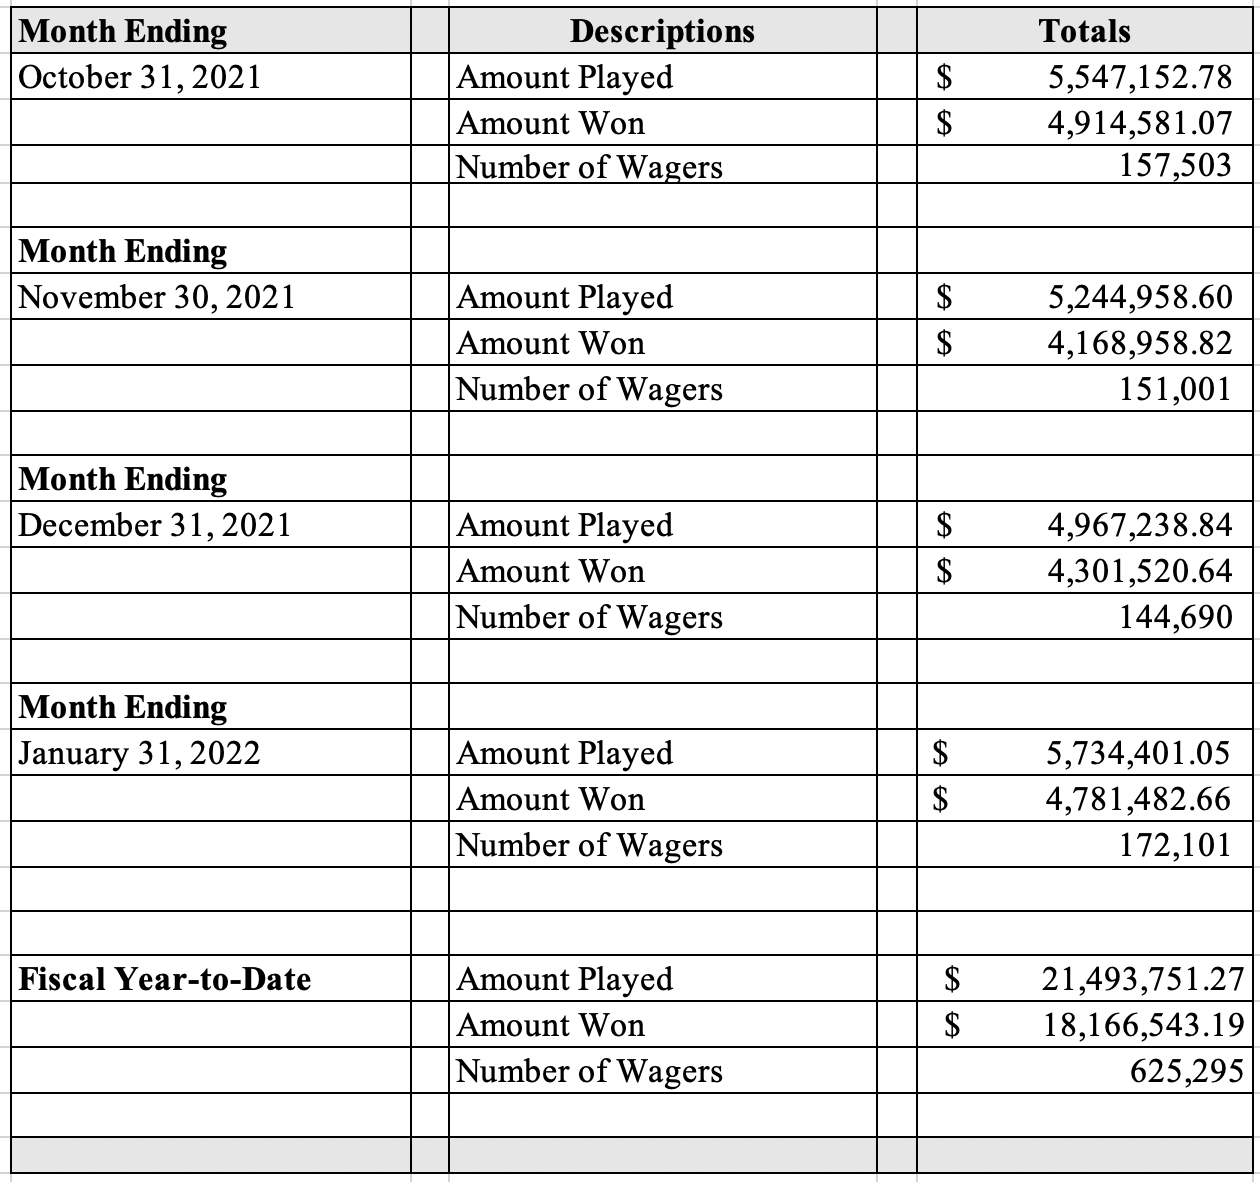 Table displaying the November 2021 Sports Wagering monthly revenue totals